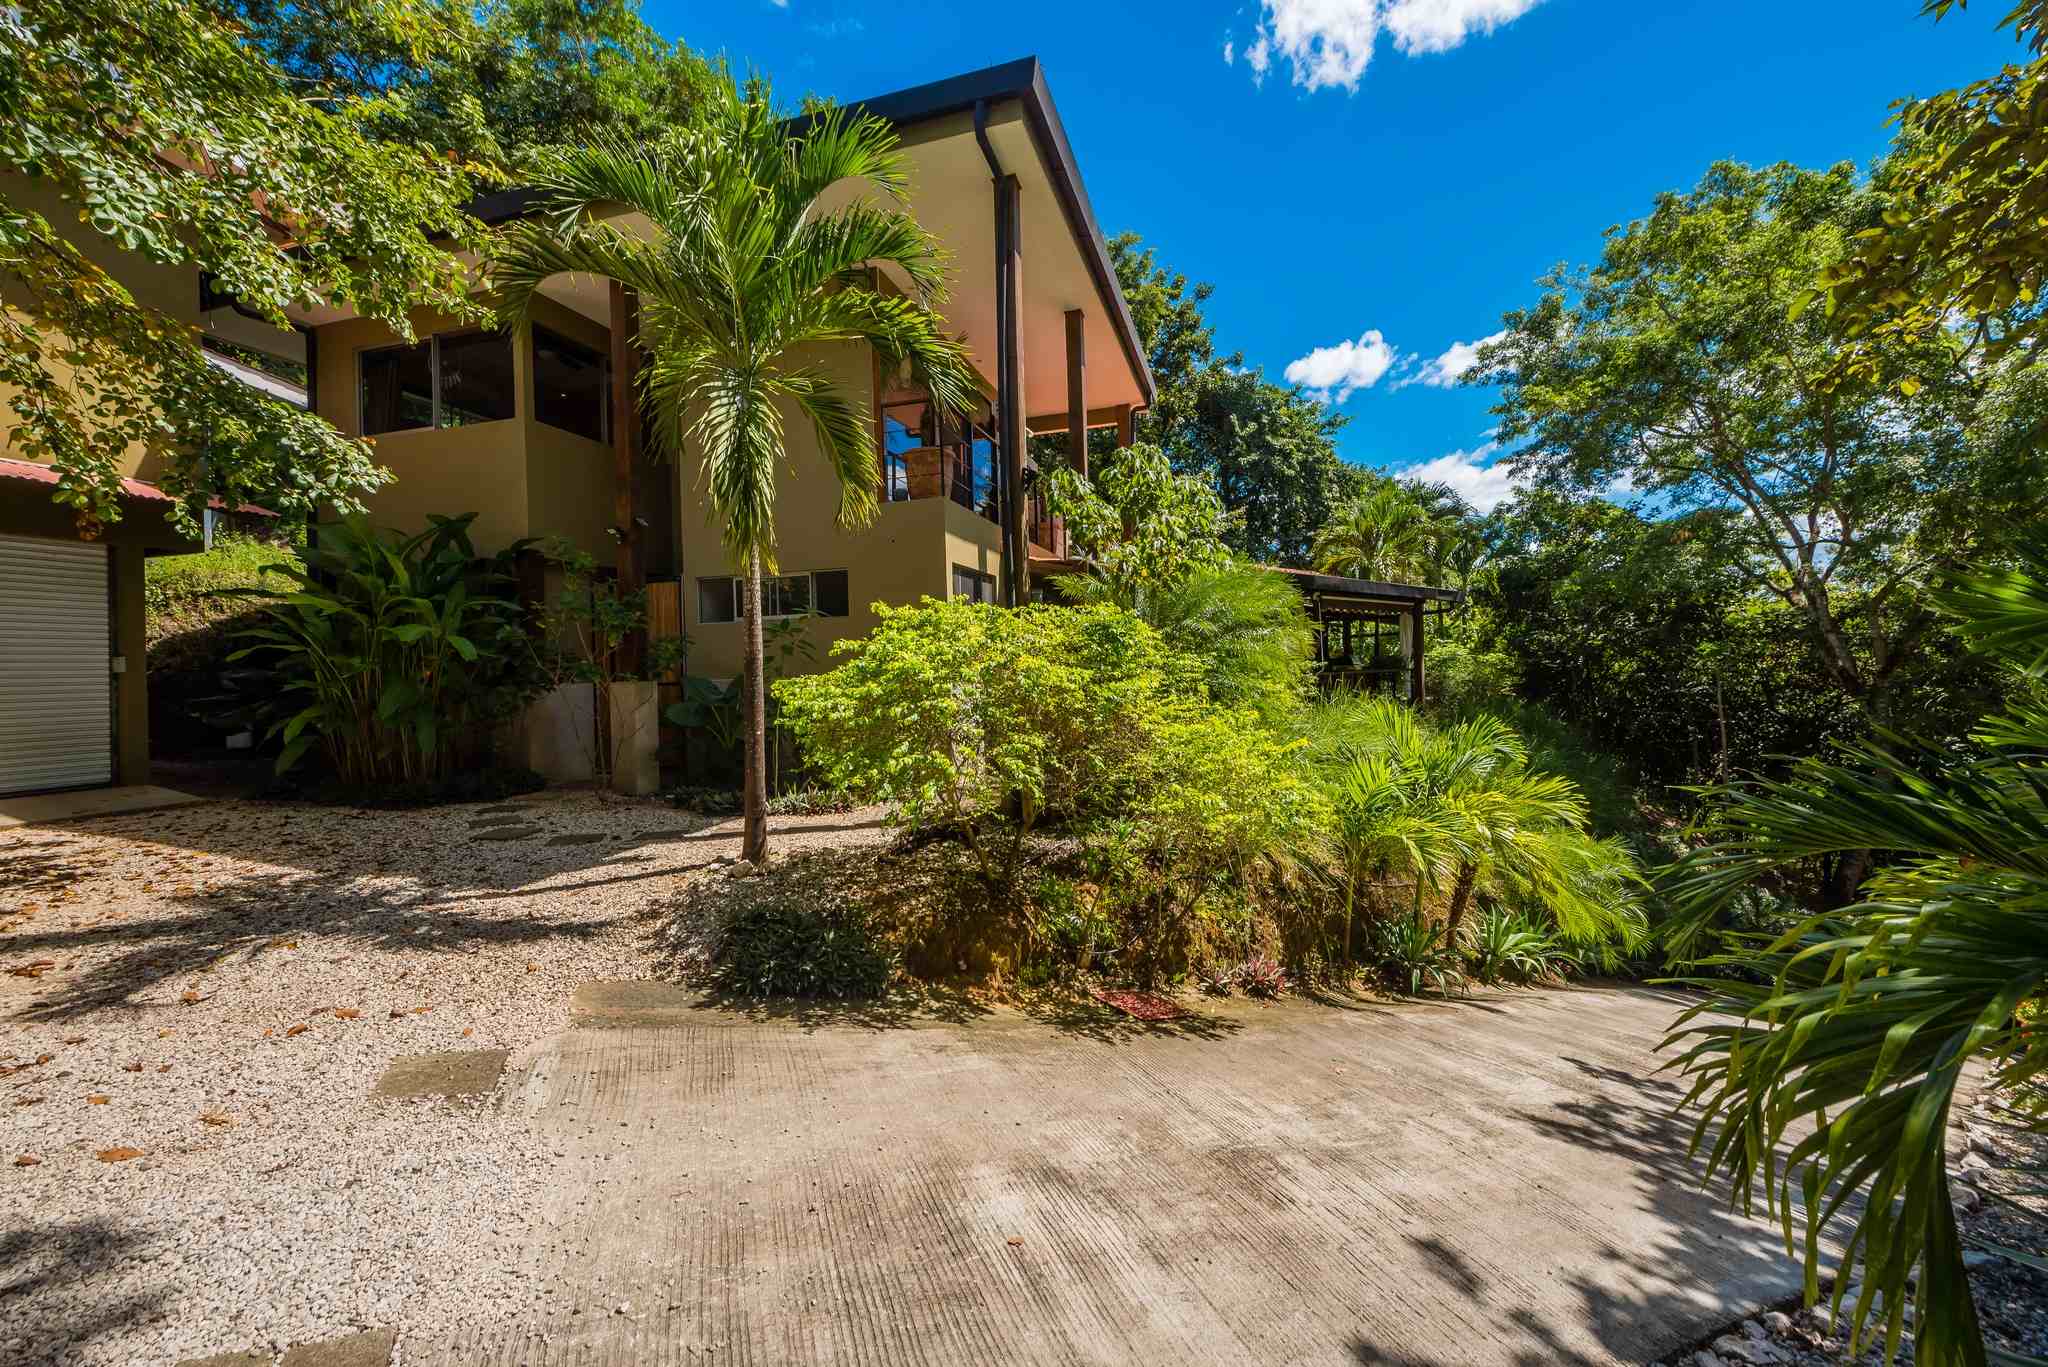 Costa Rica property for sale